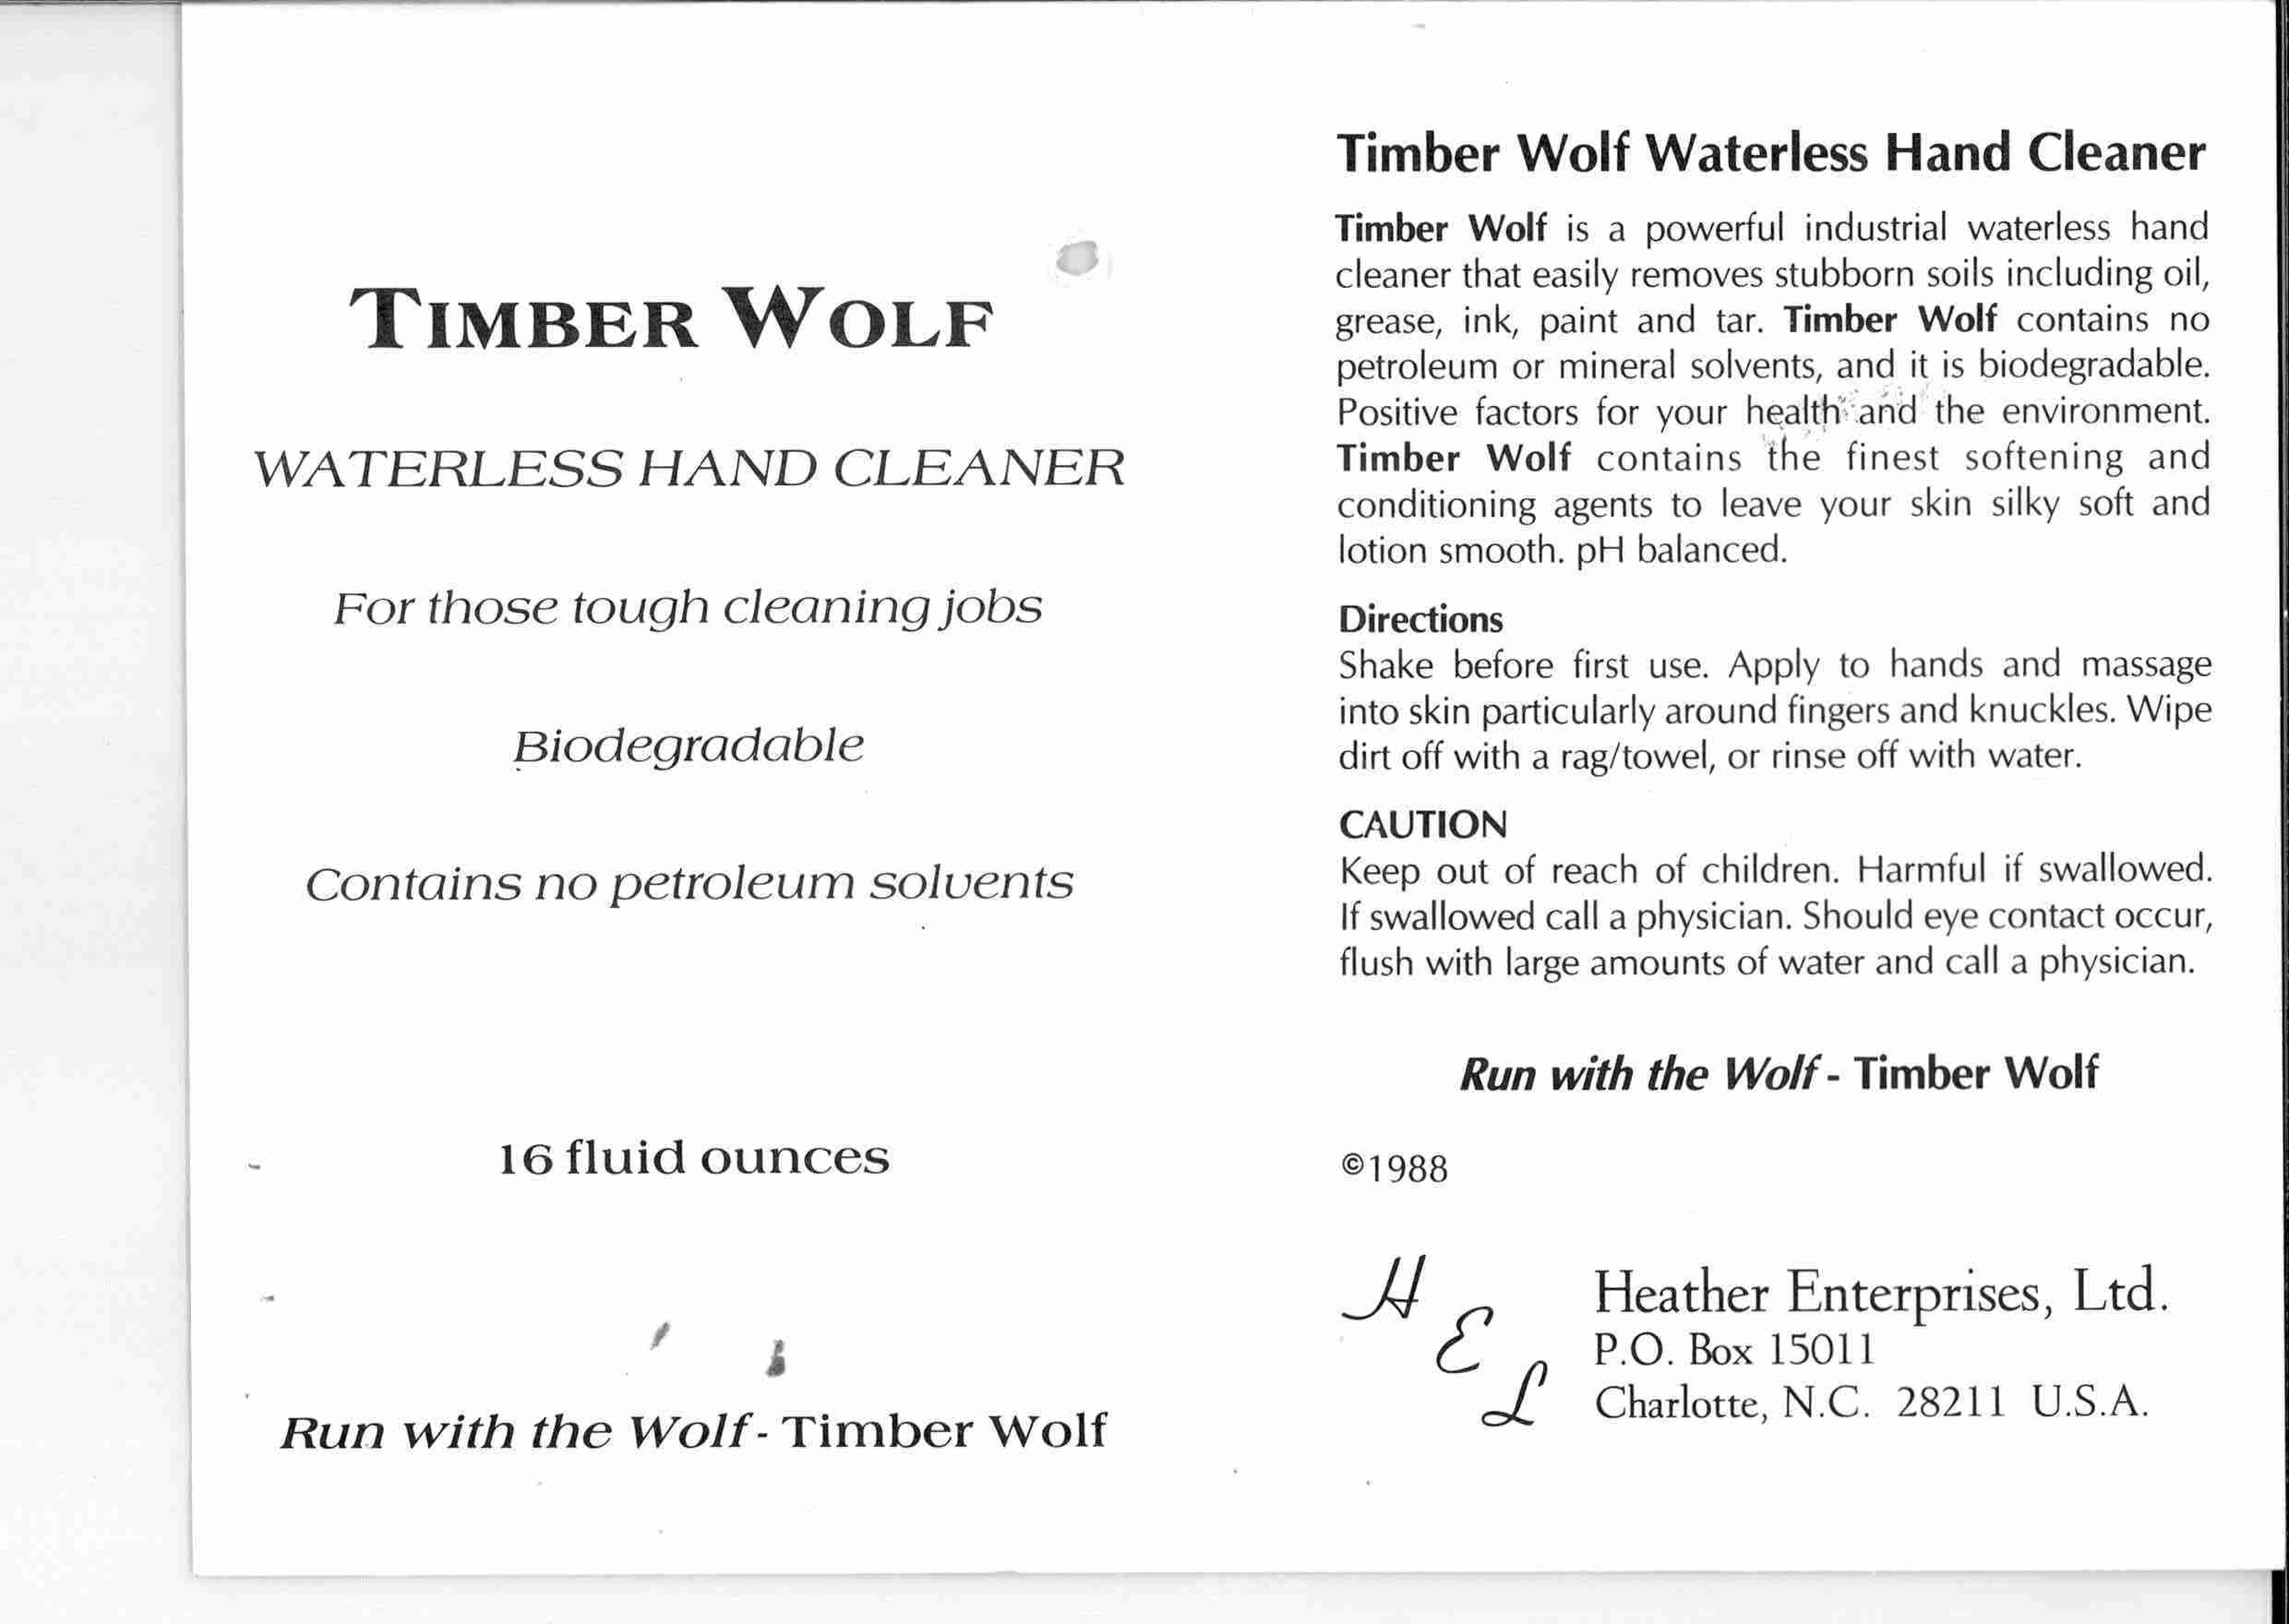 TIMBER WOLF